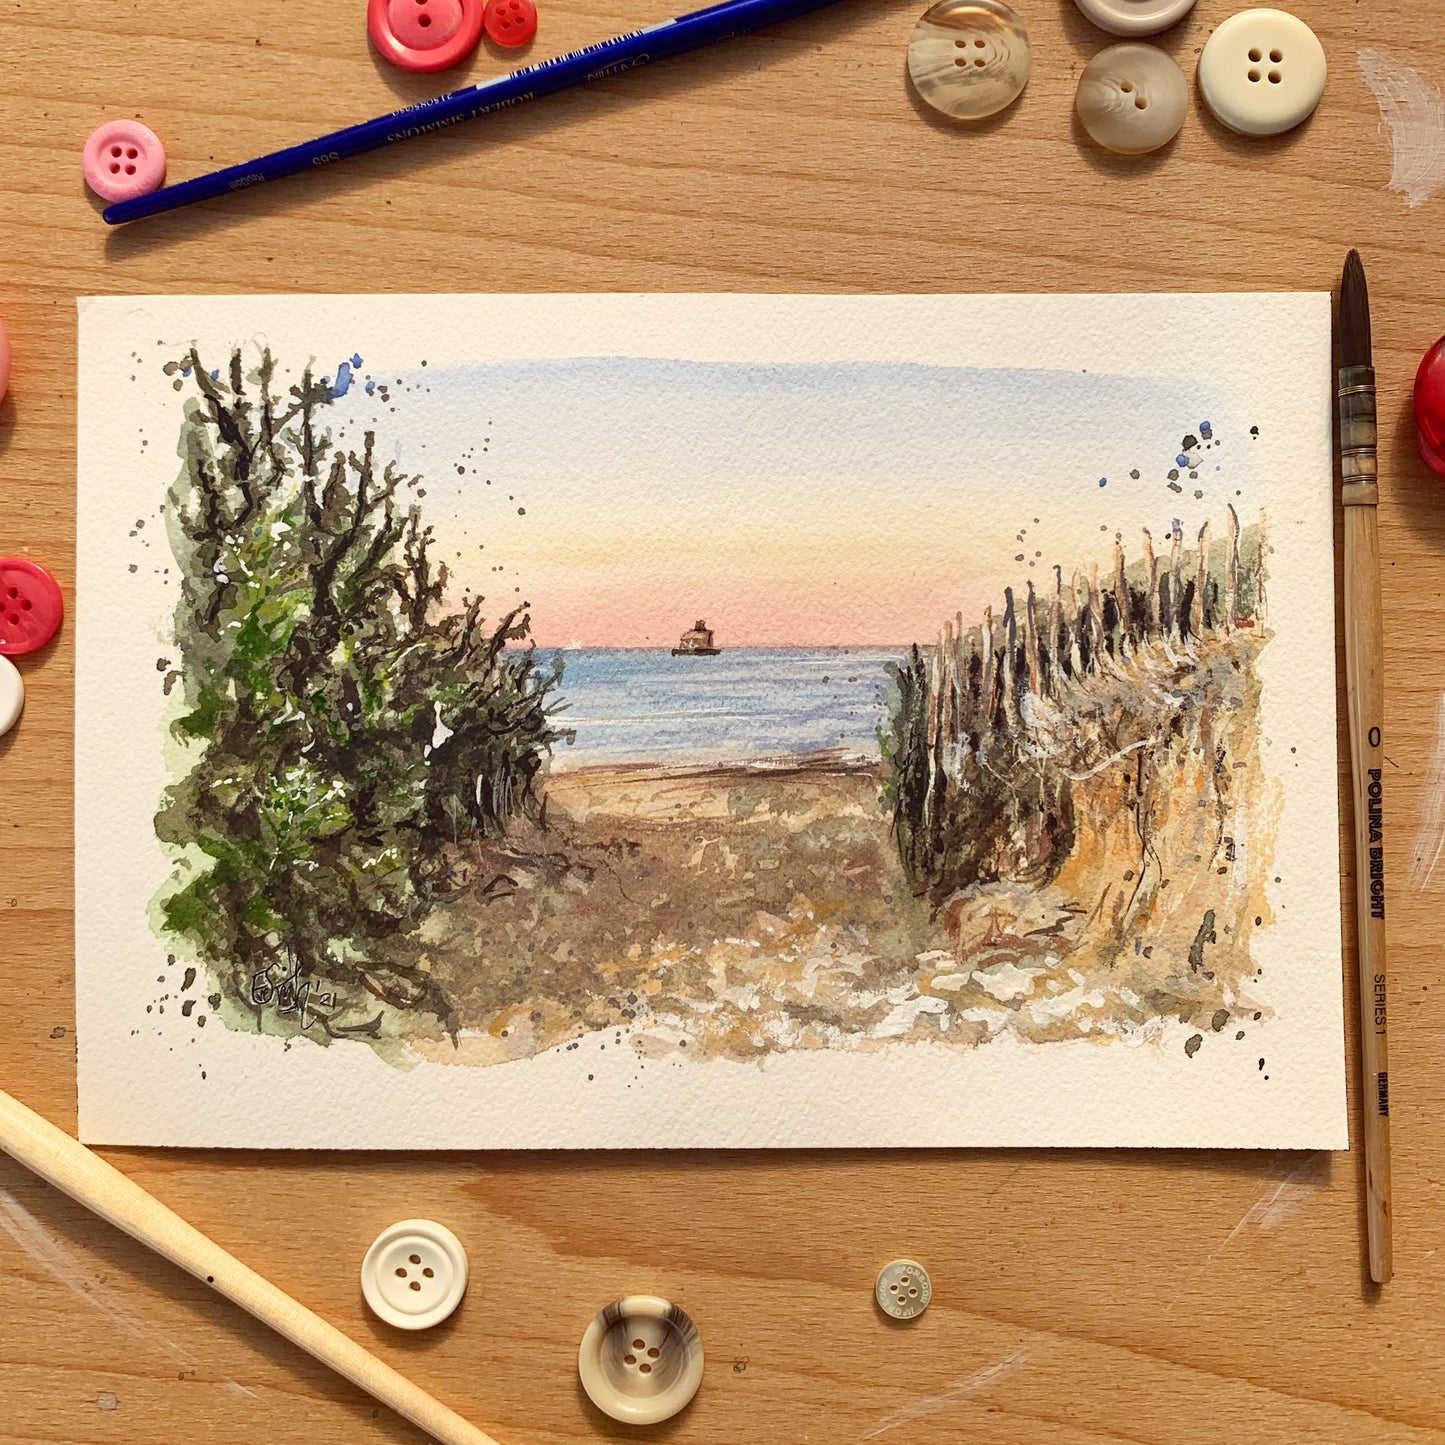 An original painting of the Haile Sands fort at Humberston Fitties beach, painted in watercolours by local artist, Eve Leoni Smith.